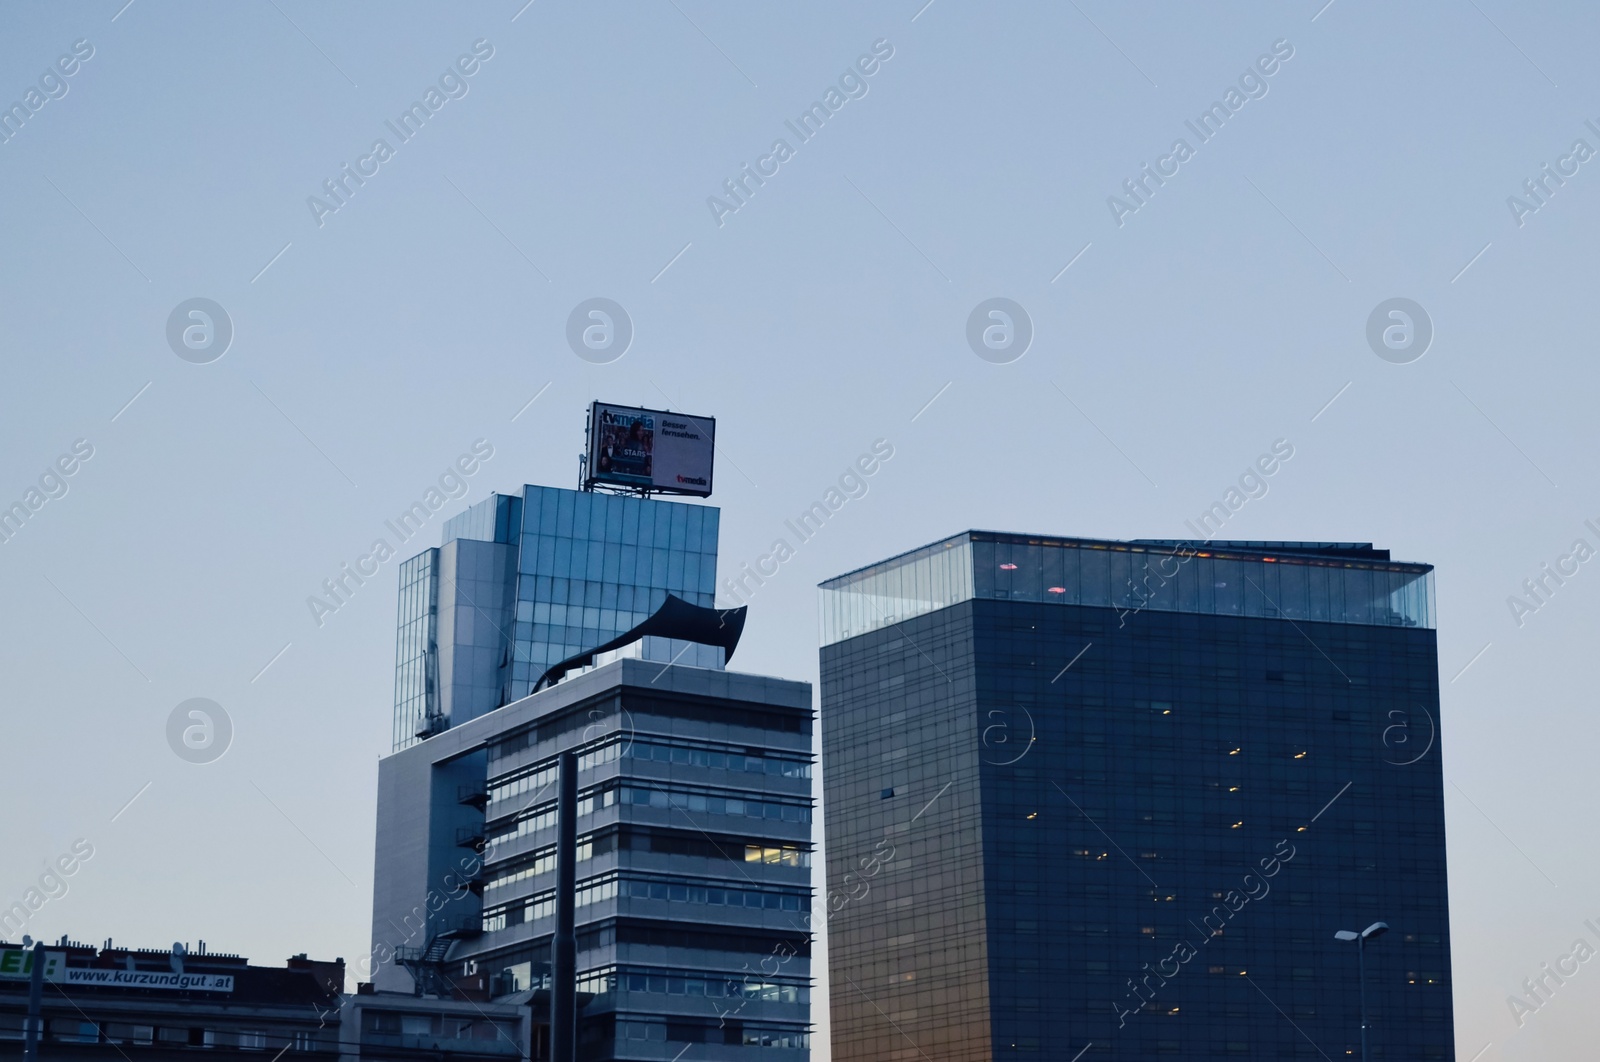 Photo of Vienna, Austria - June 20, 2018: View of modern city buildings against sky